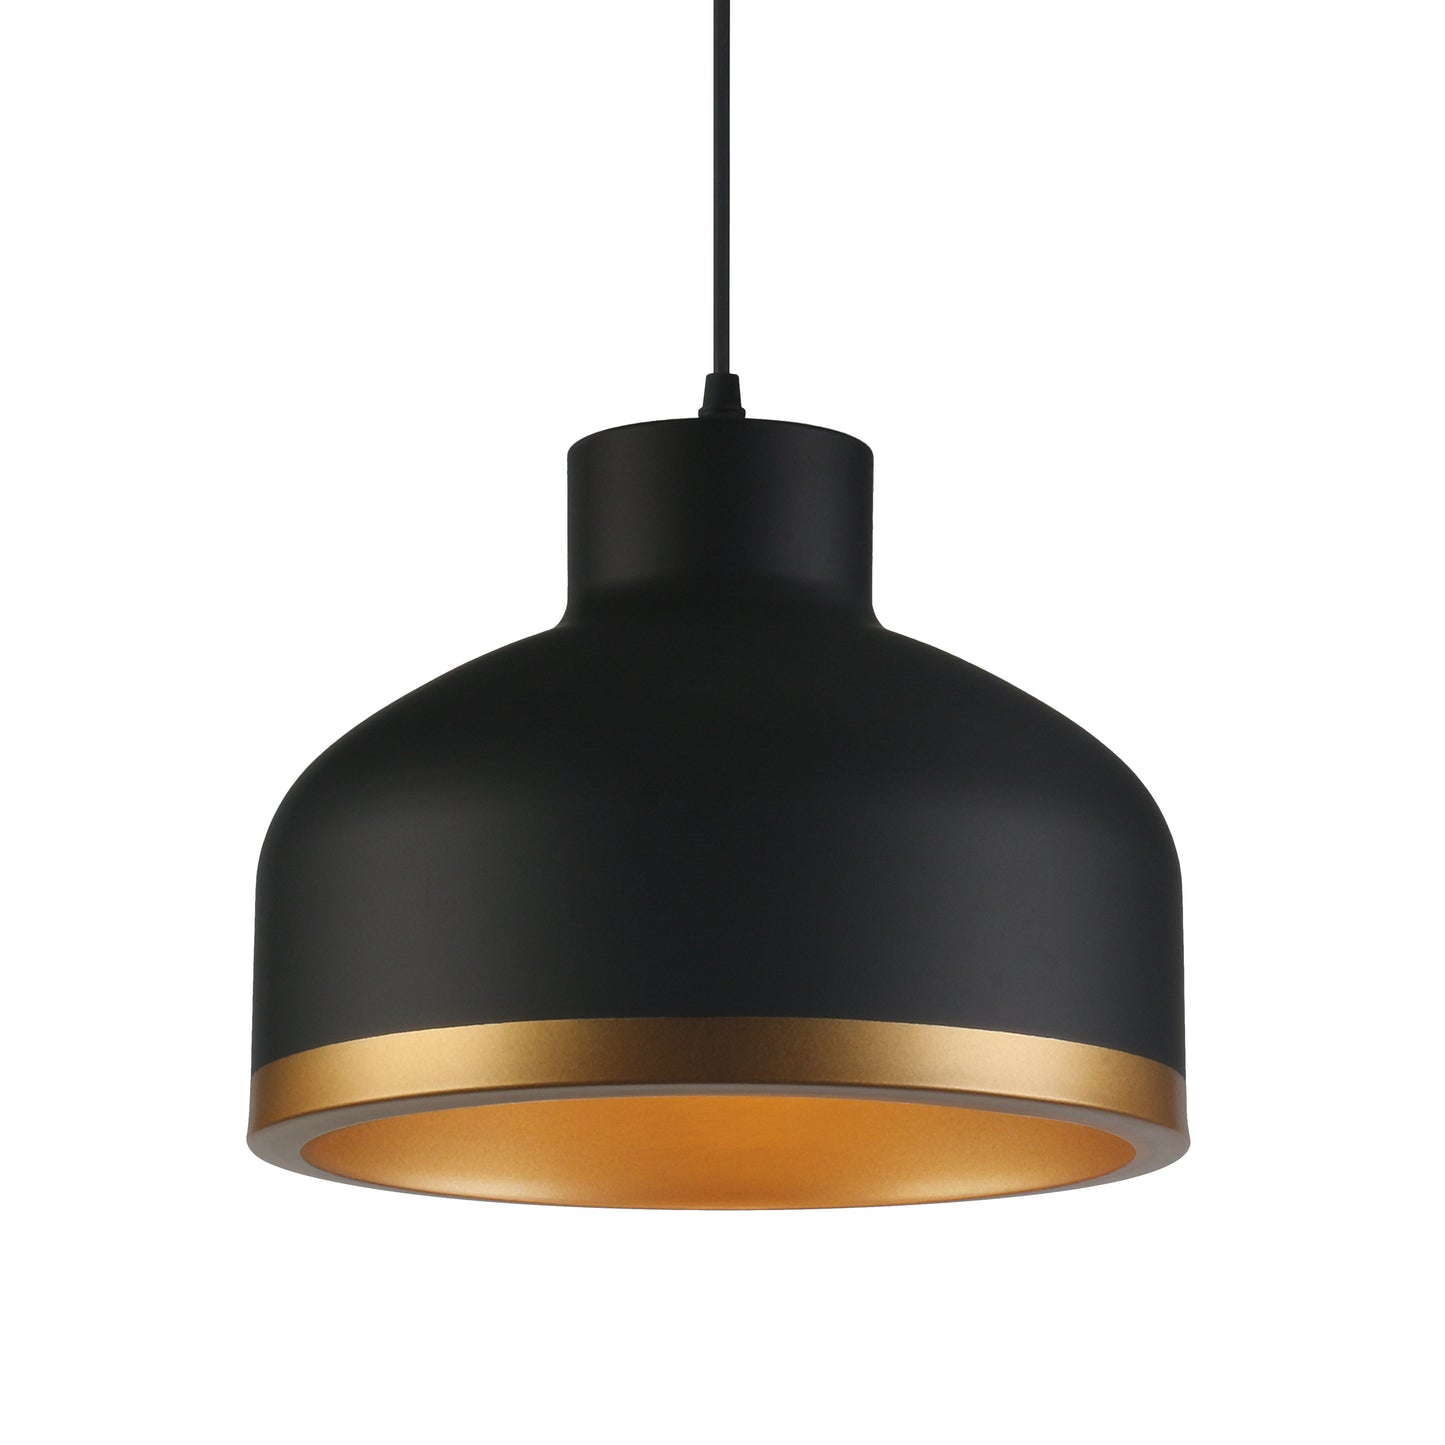 Our popular Goldi ceiling light, comes in a signature dome shape with contrasting gold trim. It is height-adjustable at the point of installation so you can position it to your exact requirements. One E27 bulb is required as it enhances such a warm and inviting glow from the contrasting inner, would look great above kitchen islands, dining tables or as main light fitting in any room.